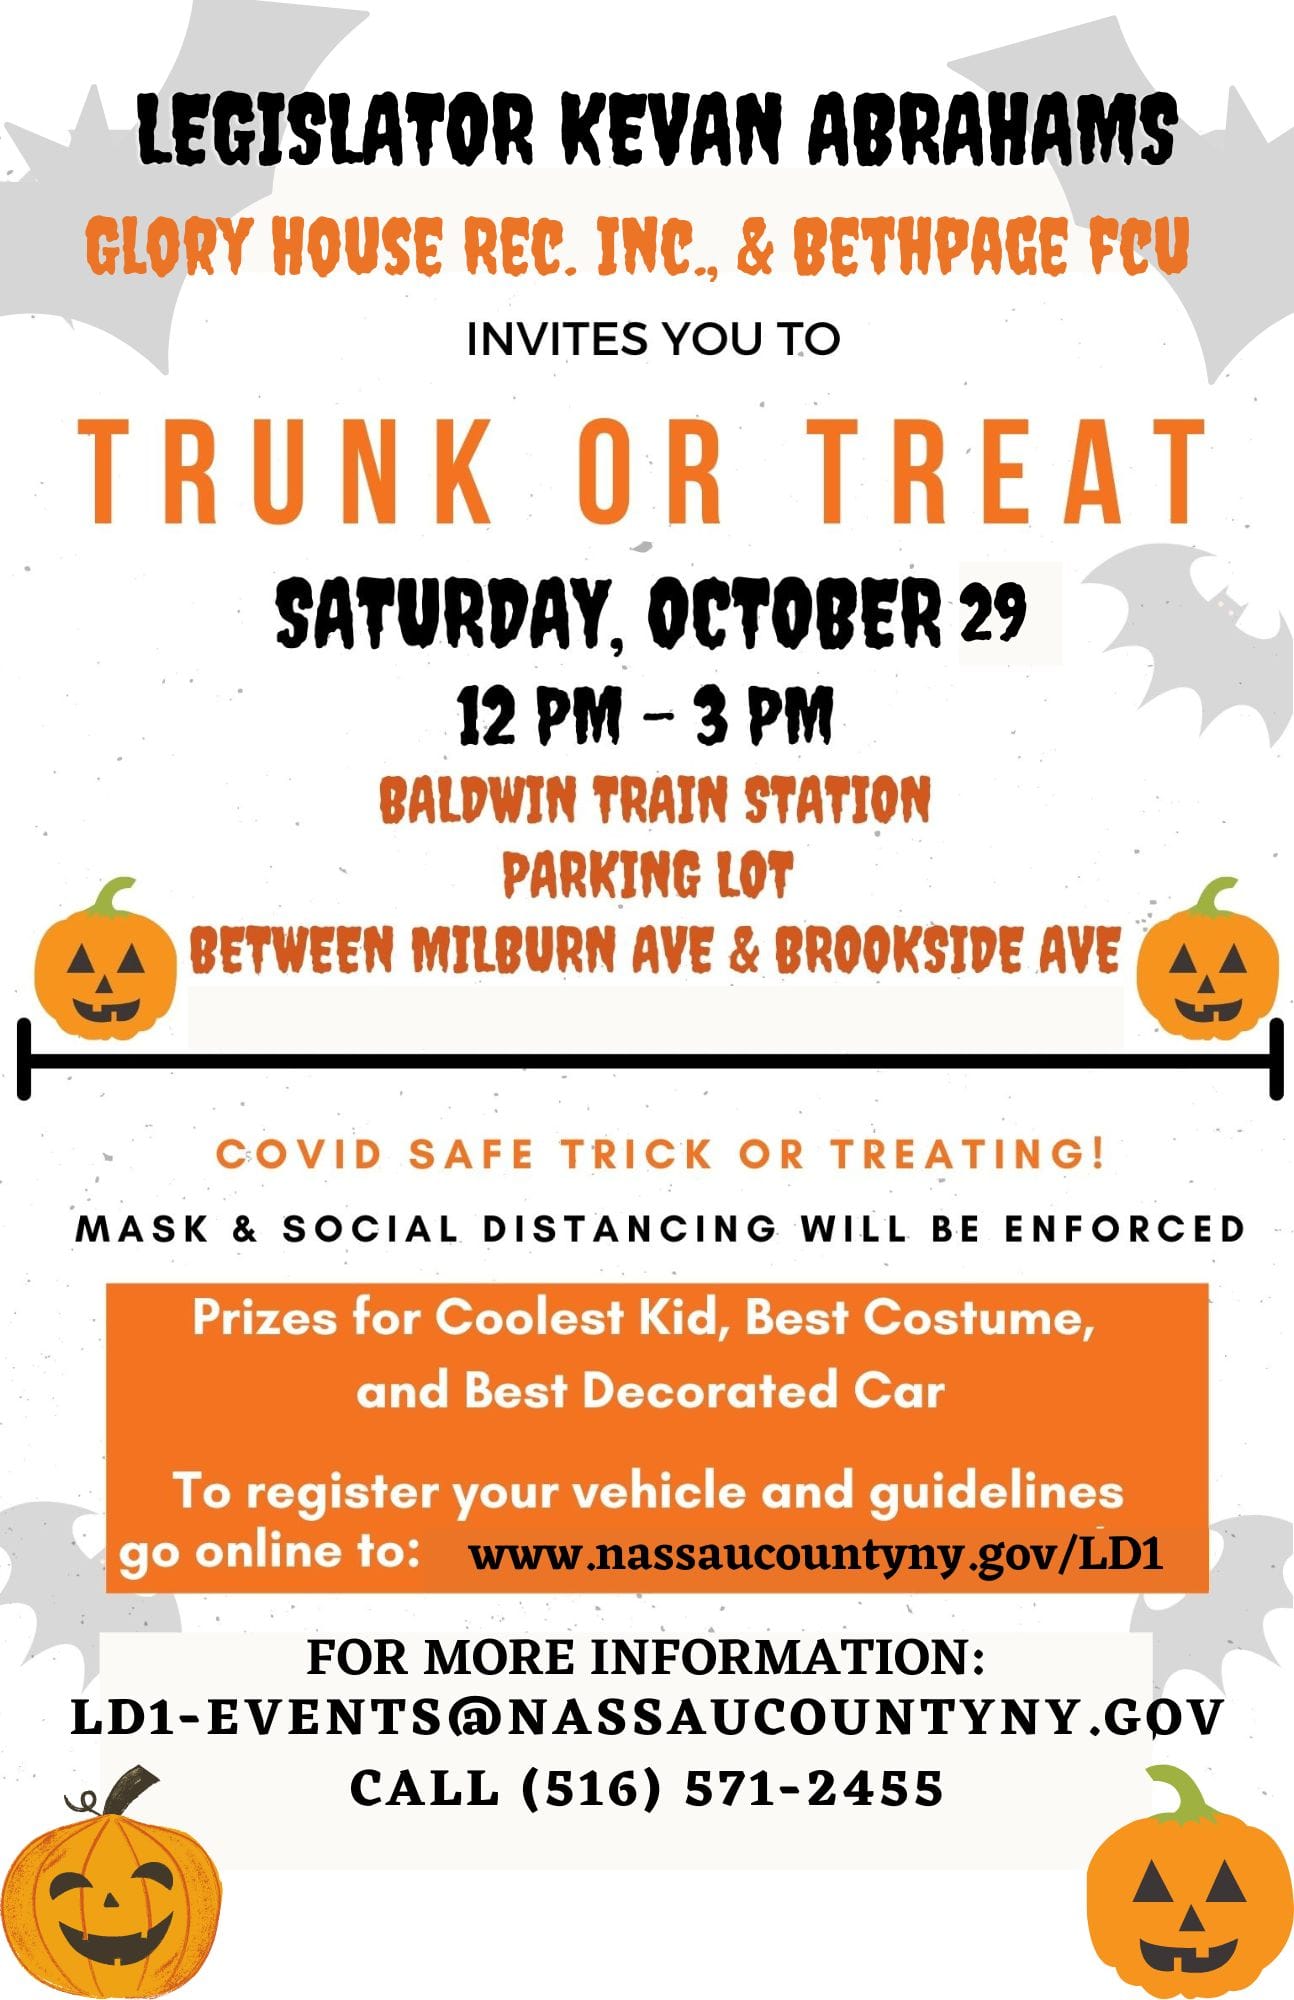 Legislator Abrahams, Bethpage Federal Credit Union, Glory House Recovery Inc. Host &#8216;Trunk Or Treat&#8217; Halloween Event In Baldwin